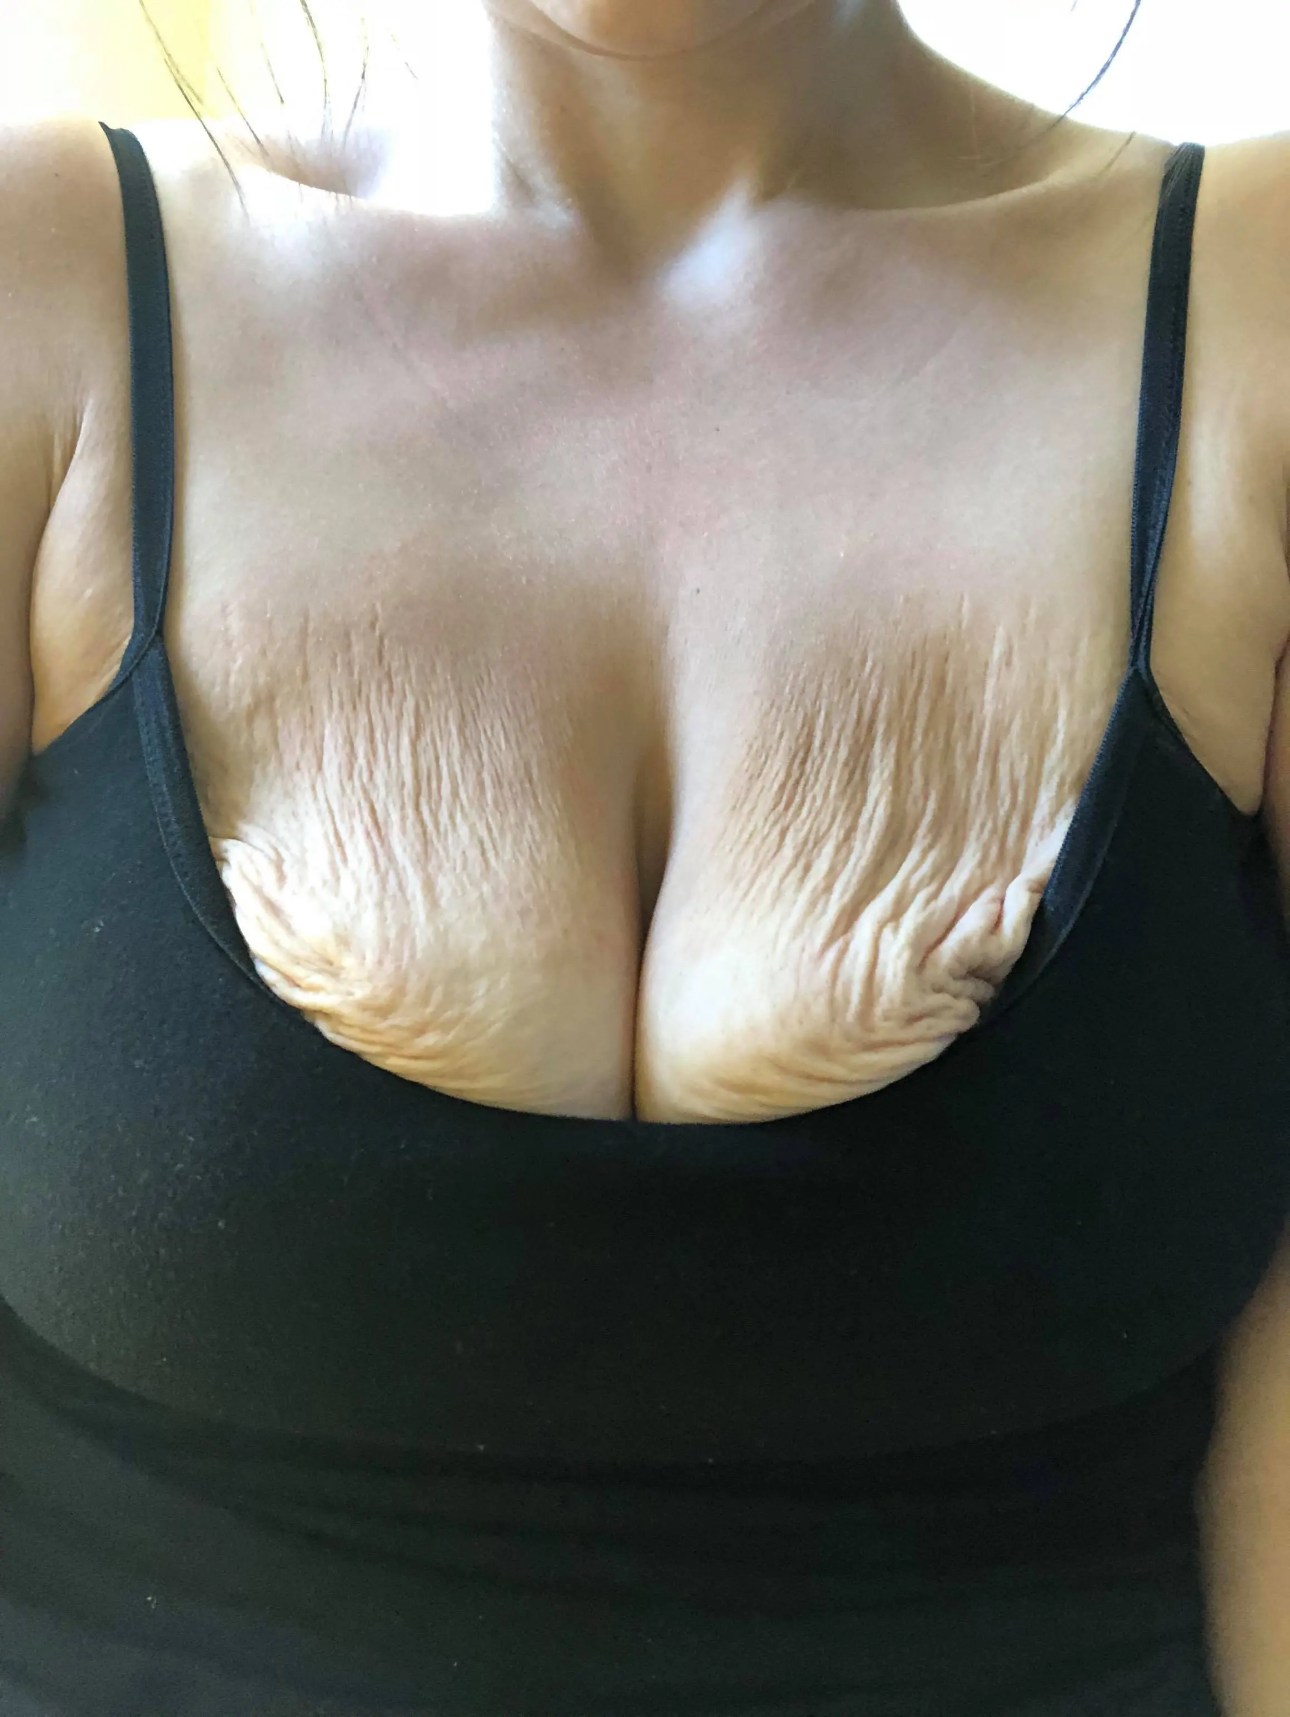 charlie box recommends mature saggy breasts tumblr pic